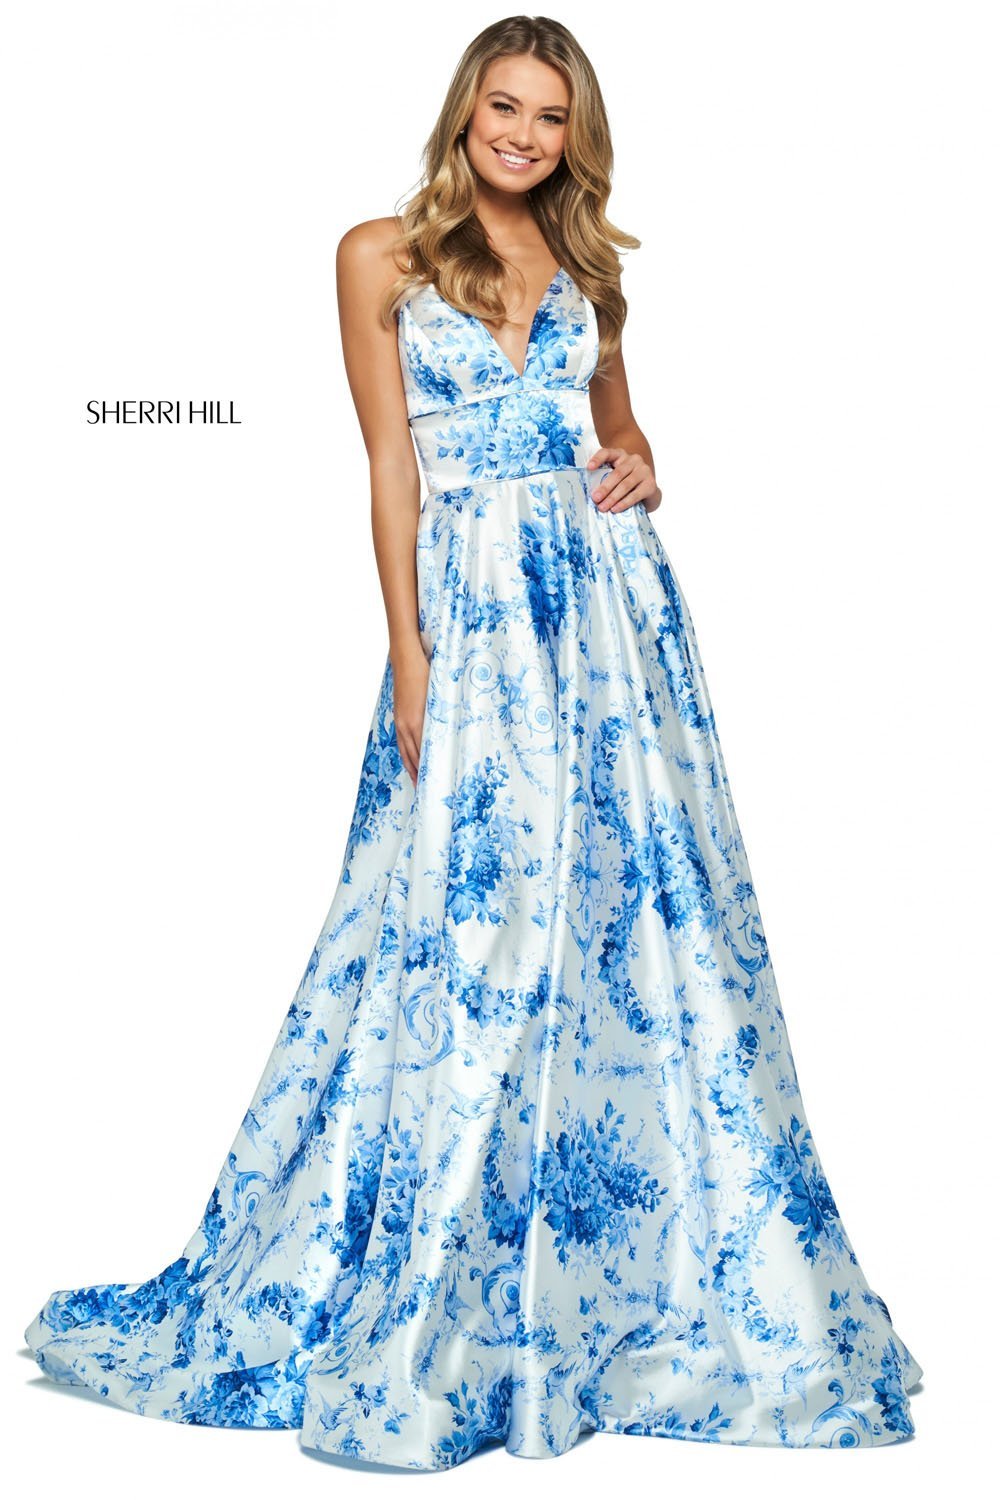 Sherri Hill 53886 dress images in these colors: Ivory Blue Print.